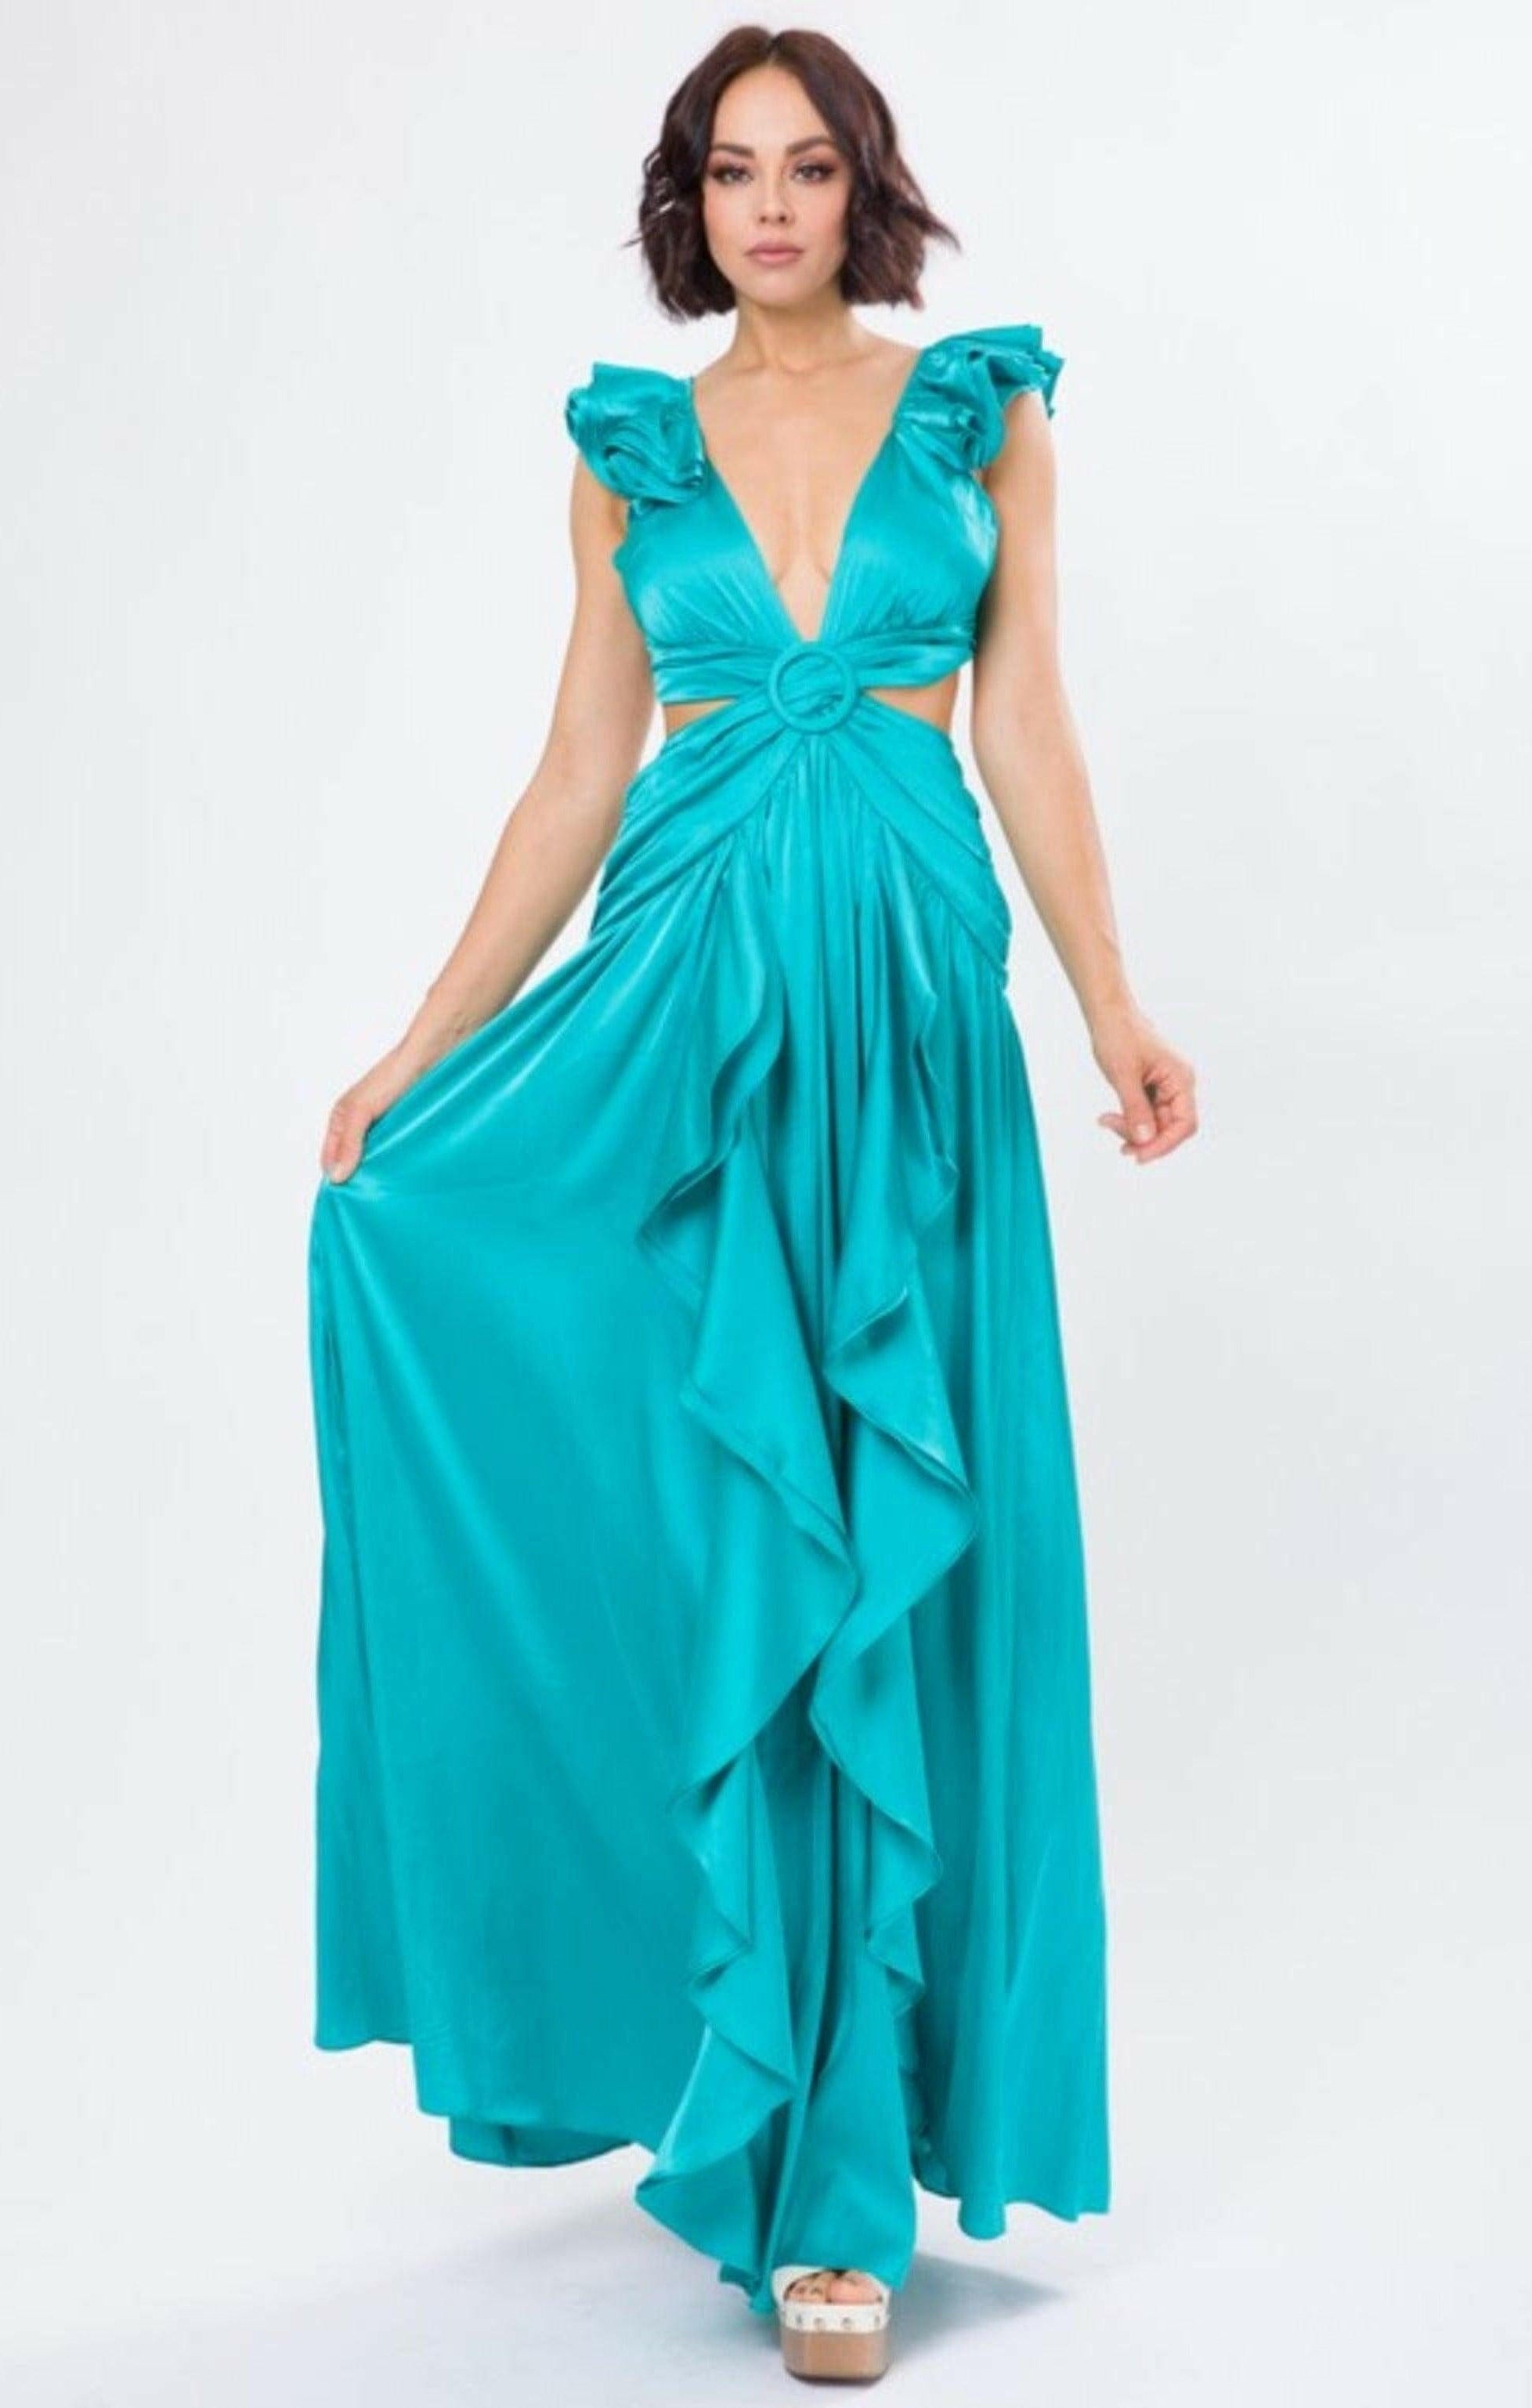 Epicplacess Dress SMALL / BLUE / UNITED STATES SOLID SATIN RUFFLE SLEEVE GOWN MAXI DRESS RVD2556